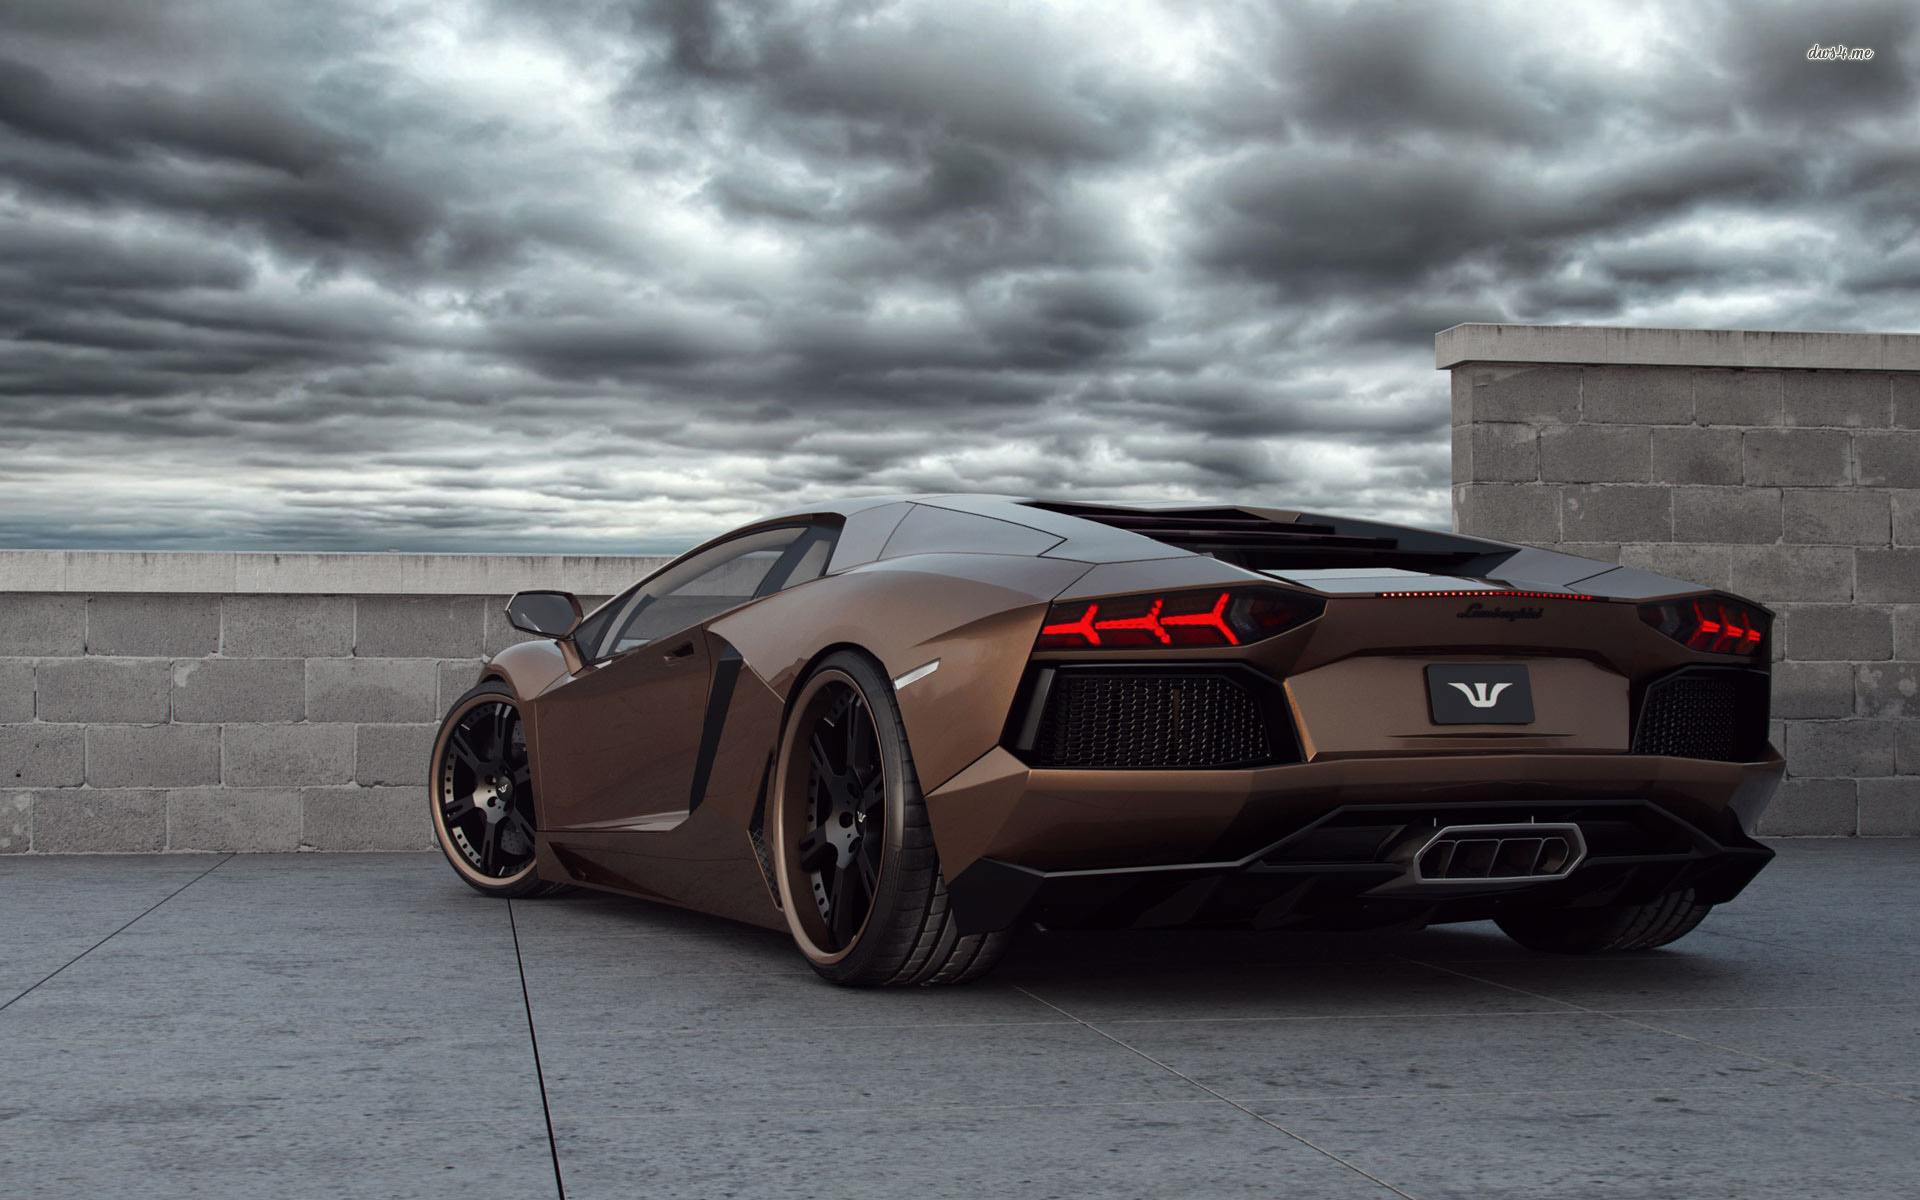 Lamborghini Aventador Wallpapers HD A8 Brown - lamborghini aventador desktop sports cars, race cars, luxury cars, expensive cars, wallpapers pictures images free download